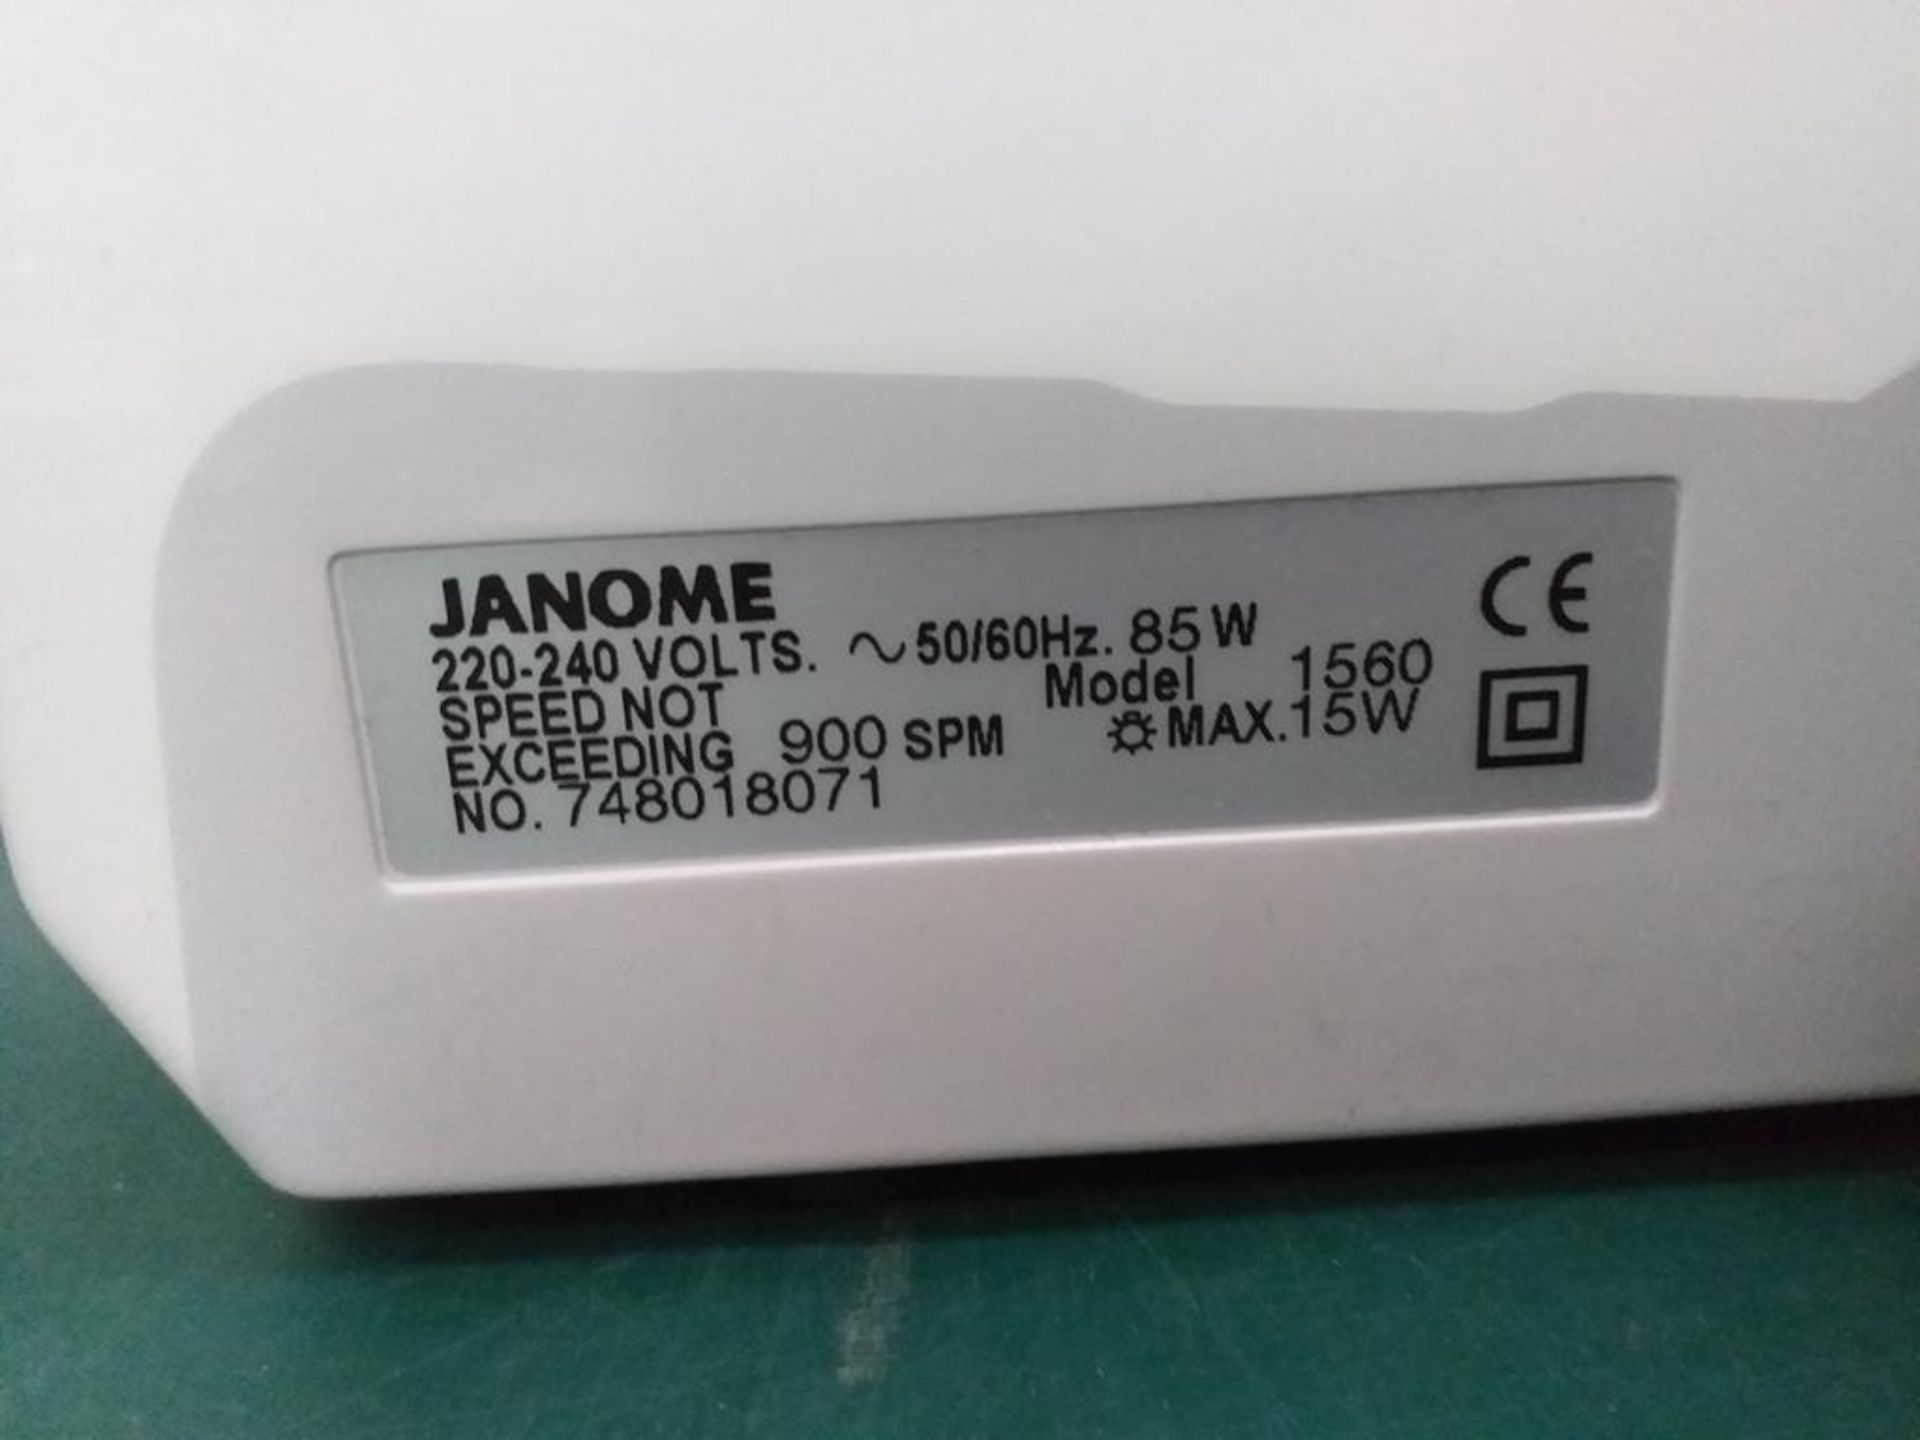 Janome Electric Sewing Machine - Image 2 of 3